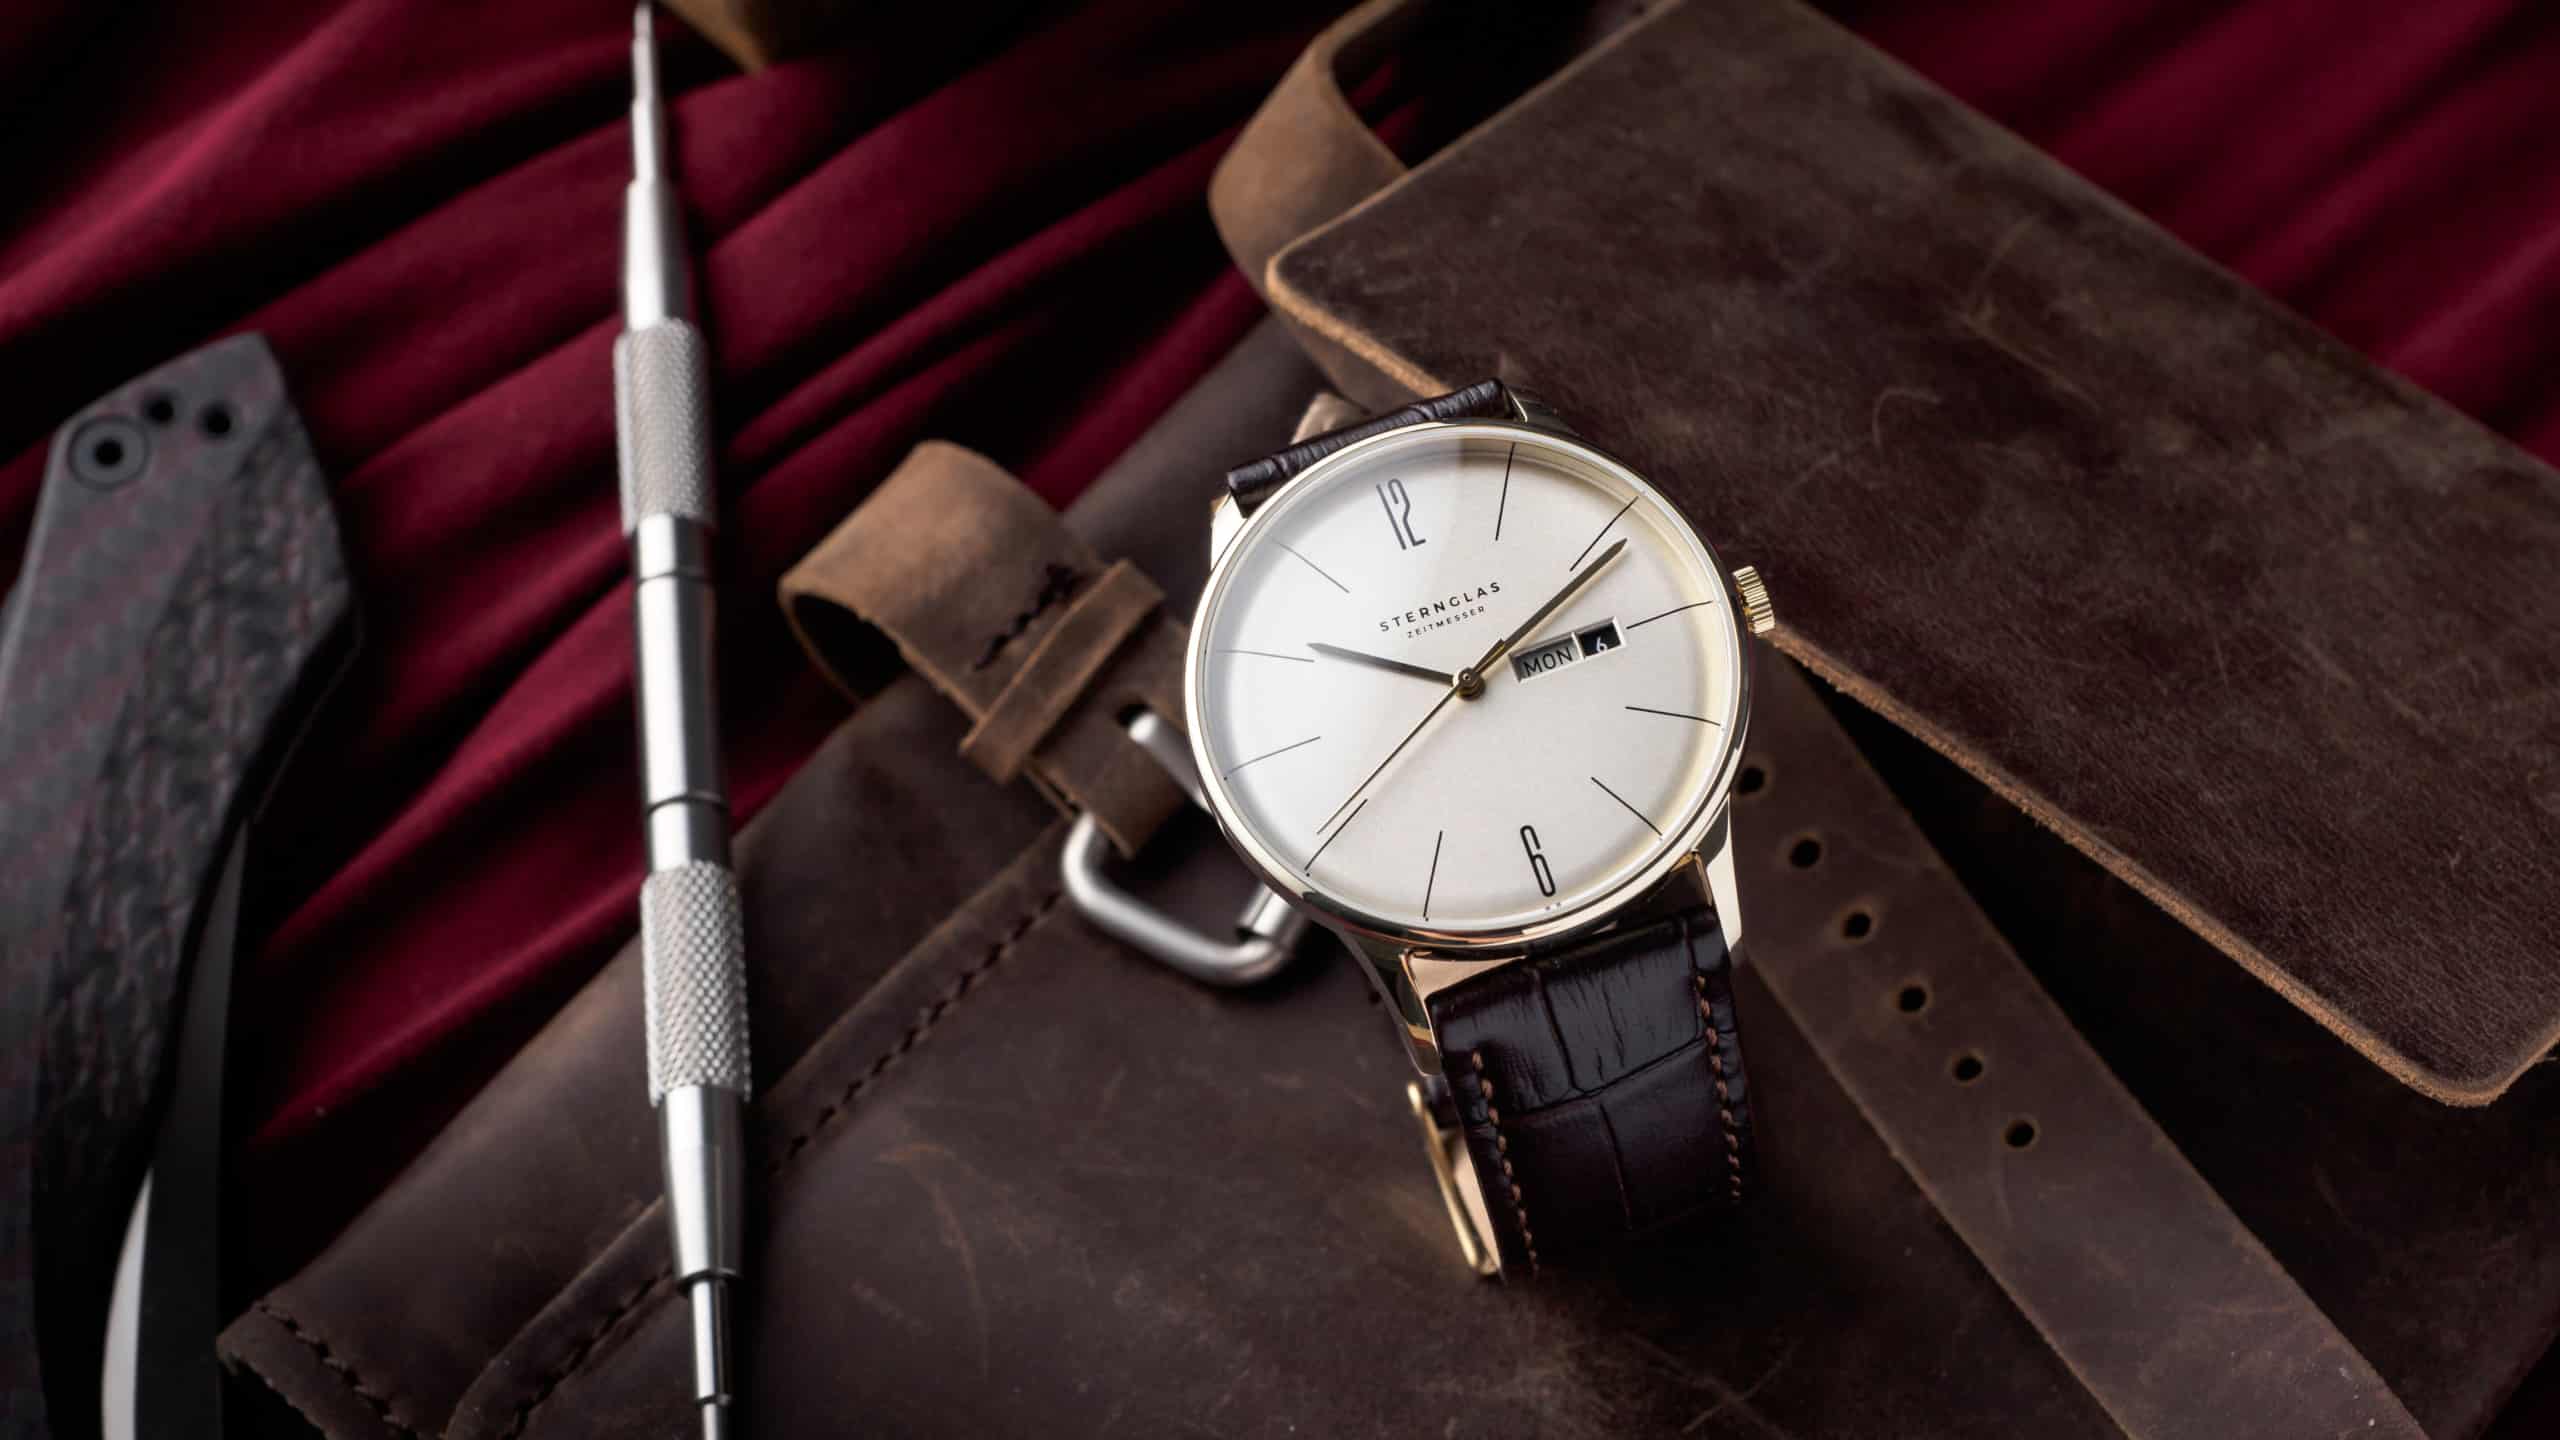 Bauhaus on a Budget: A Holiday Gift Guide to Sternglas Watches